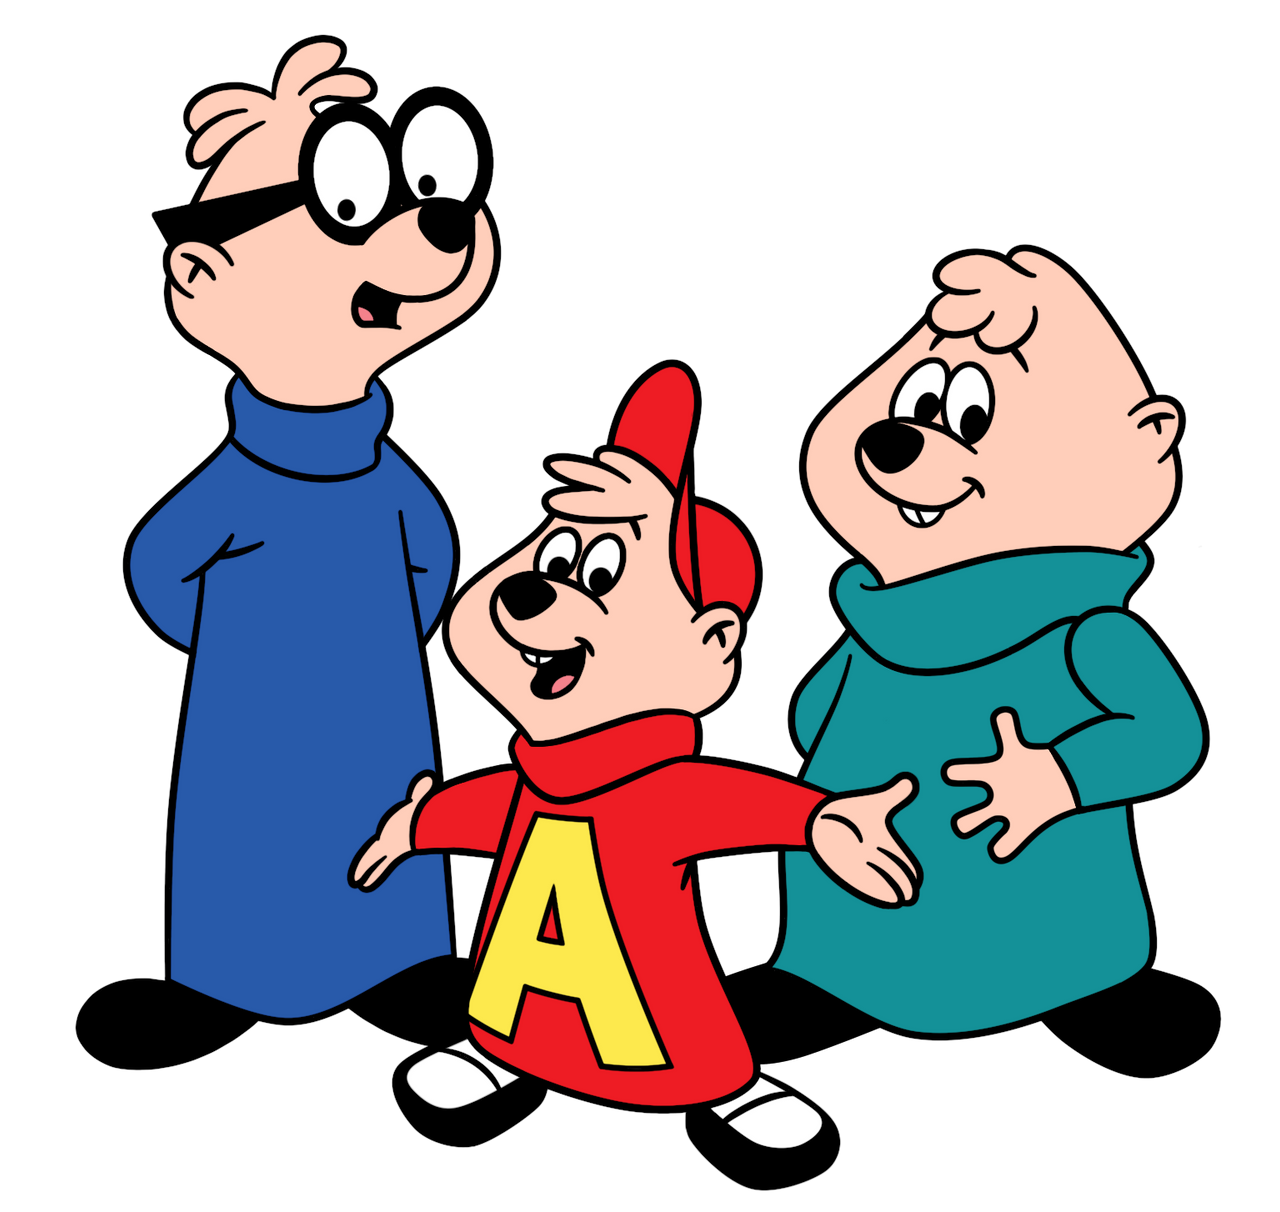 Simon, Alvin and Theodore by toon1990 on DeviantArt